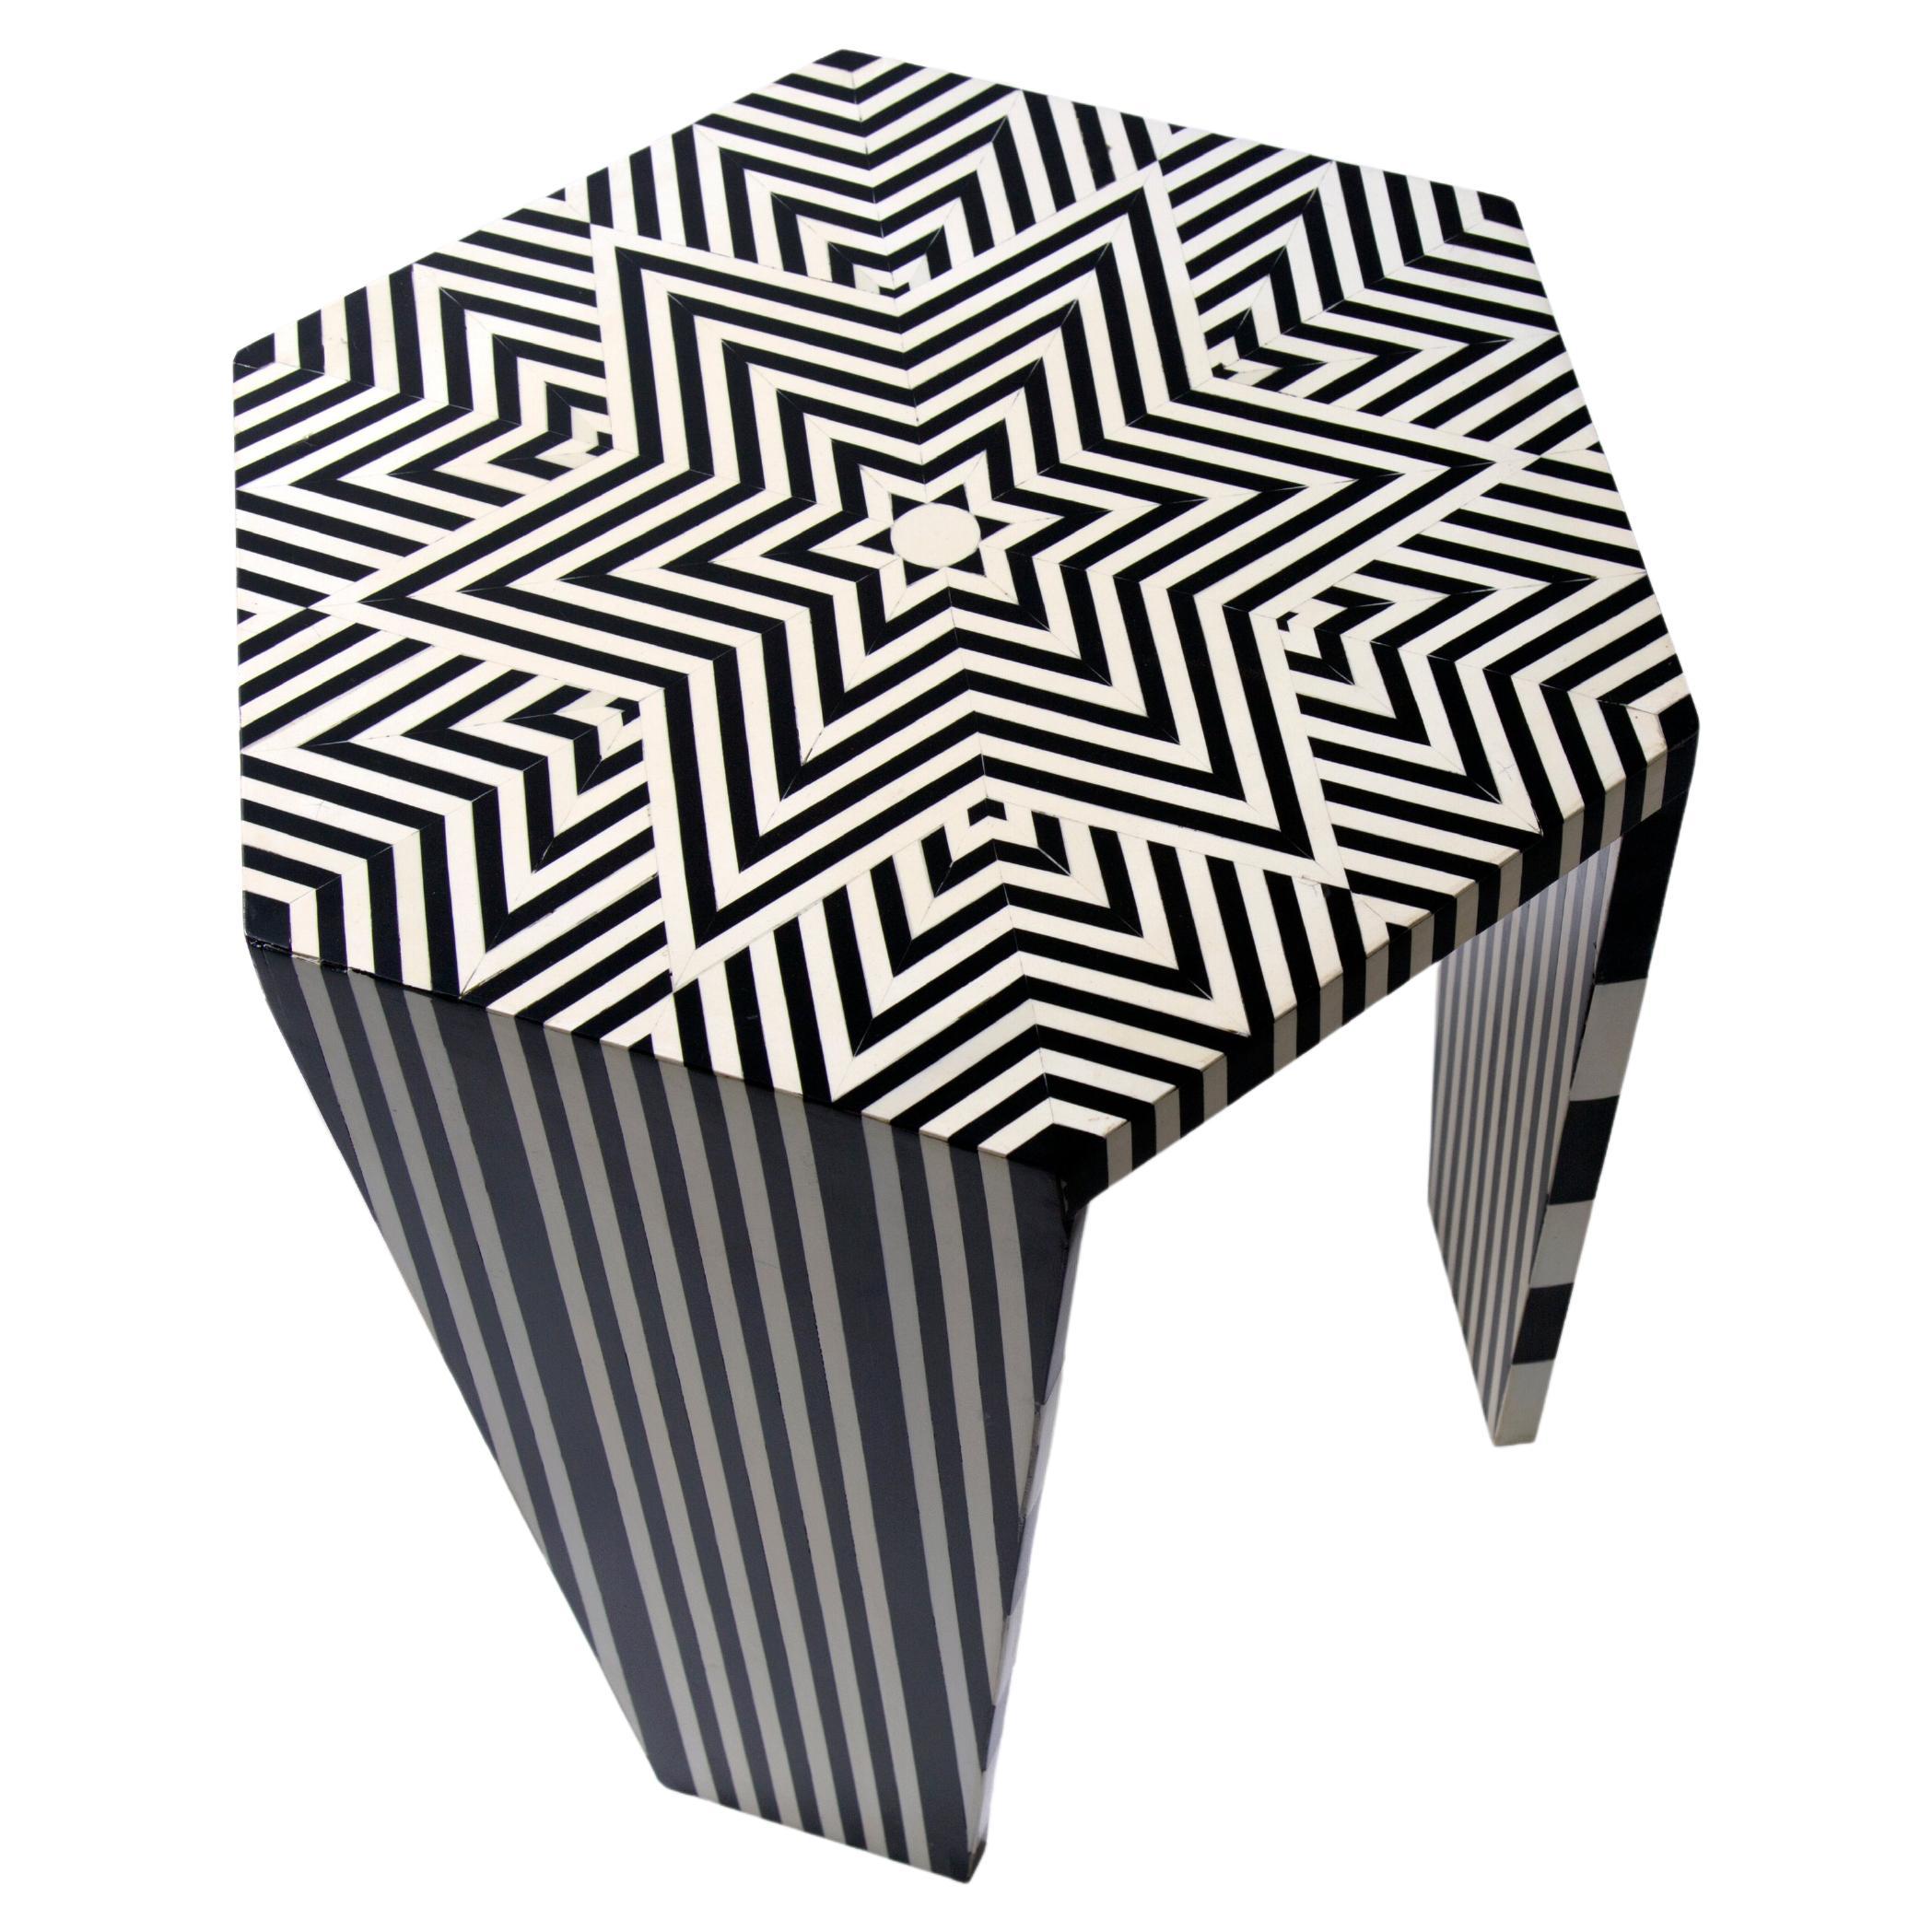 Hand-Crafted Side Table with Black & White Star Pattern Made of Acrylic - Large